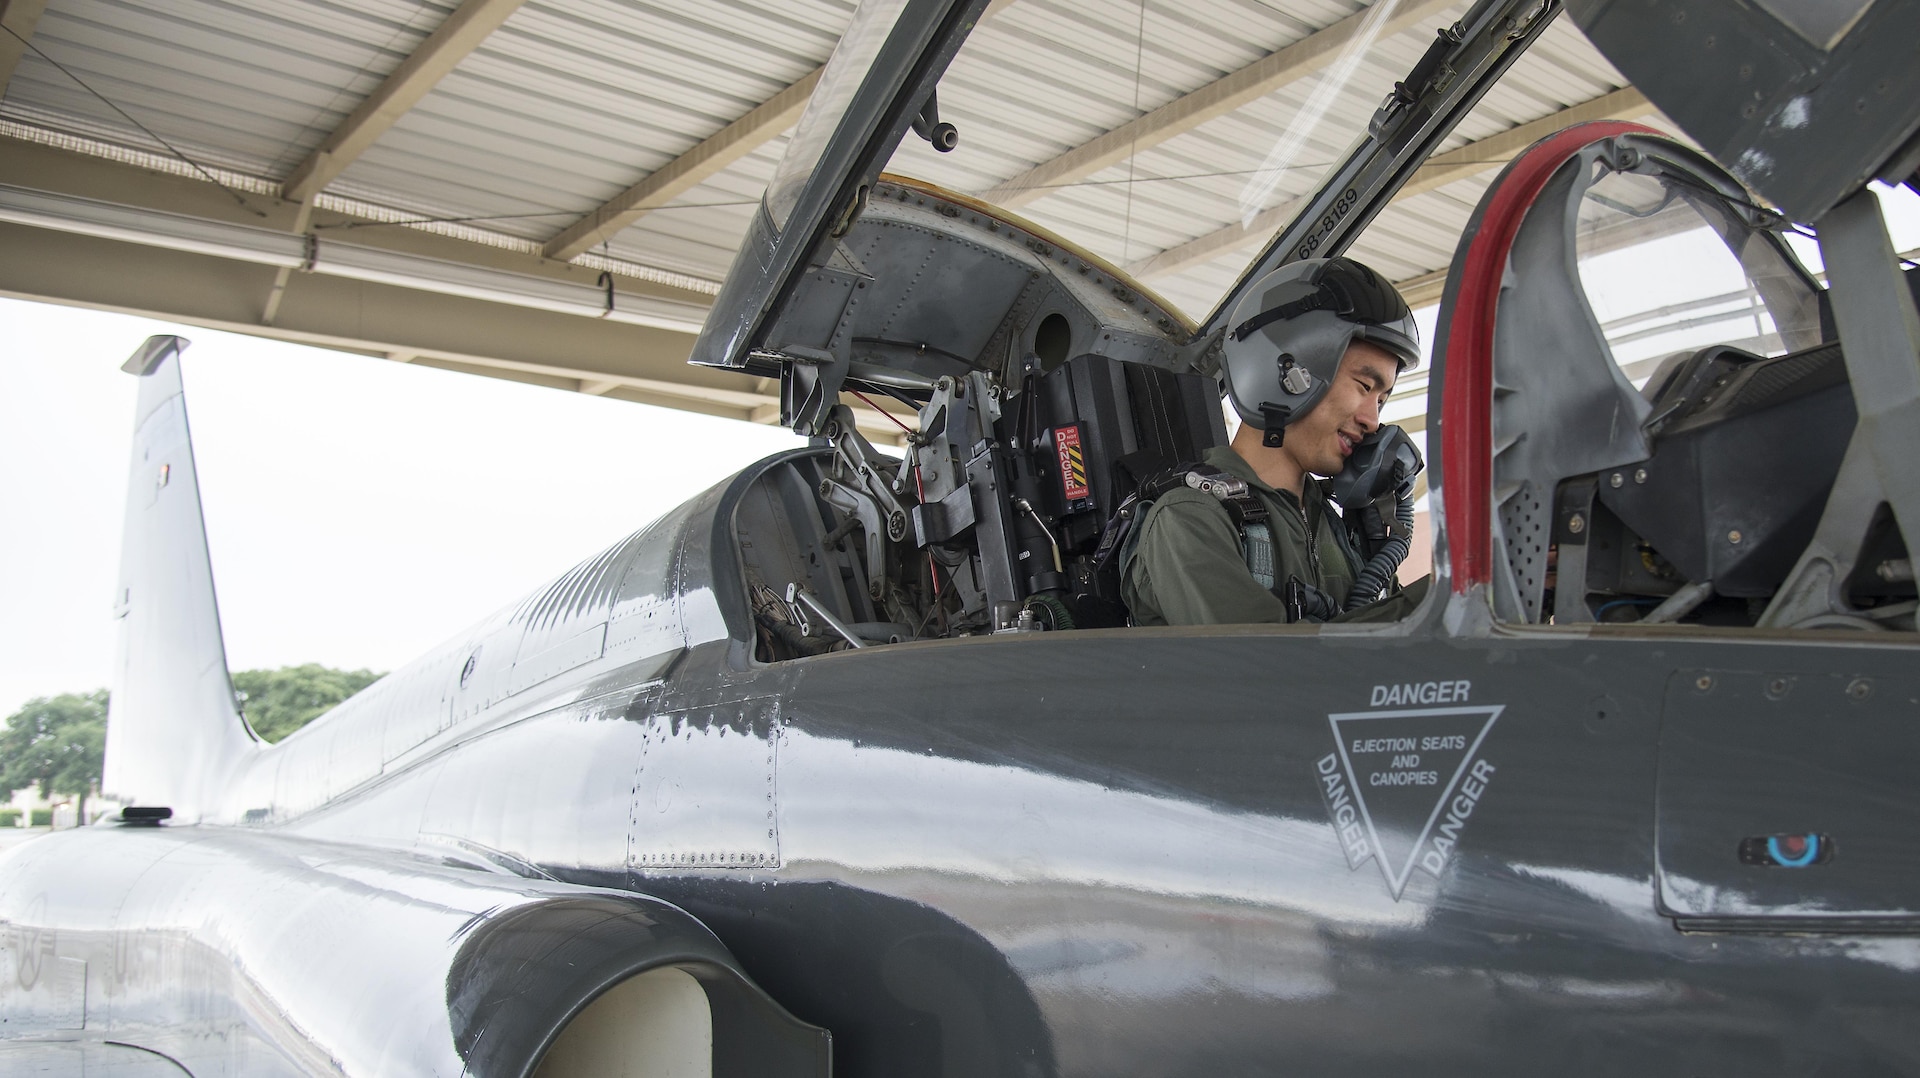 Second Lt. Chris Hsu, Air Education and Training Command Judge Advocate legal intern,  prepares for an incentive flight in a T-38 Talon at Joint Base San Antonio-Randolph July 27, 2016. Hsu was nominated by Col. Polly Kenny, AETC staff judge advocate, for the incentive flight due to his exemplary performance while interning. 